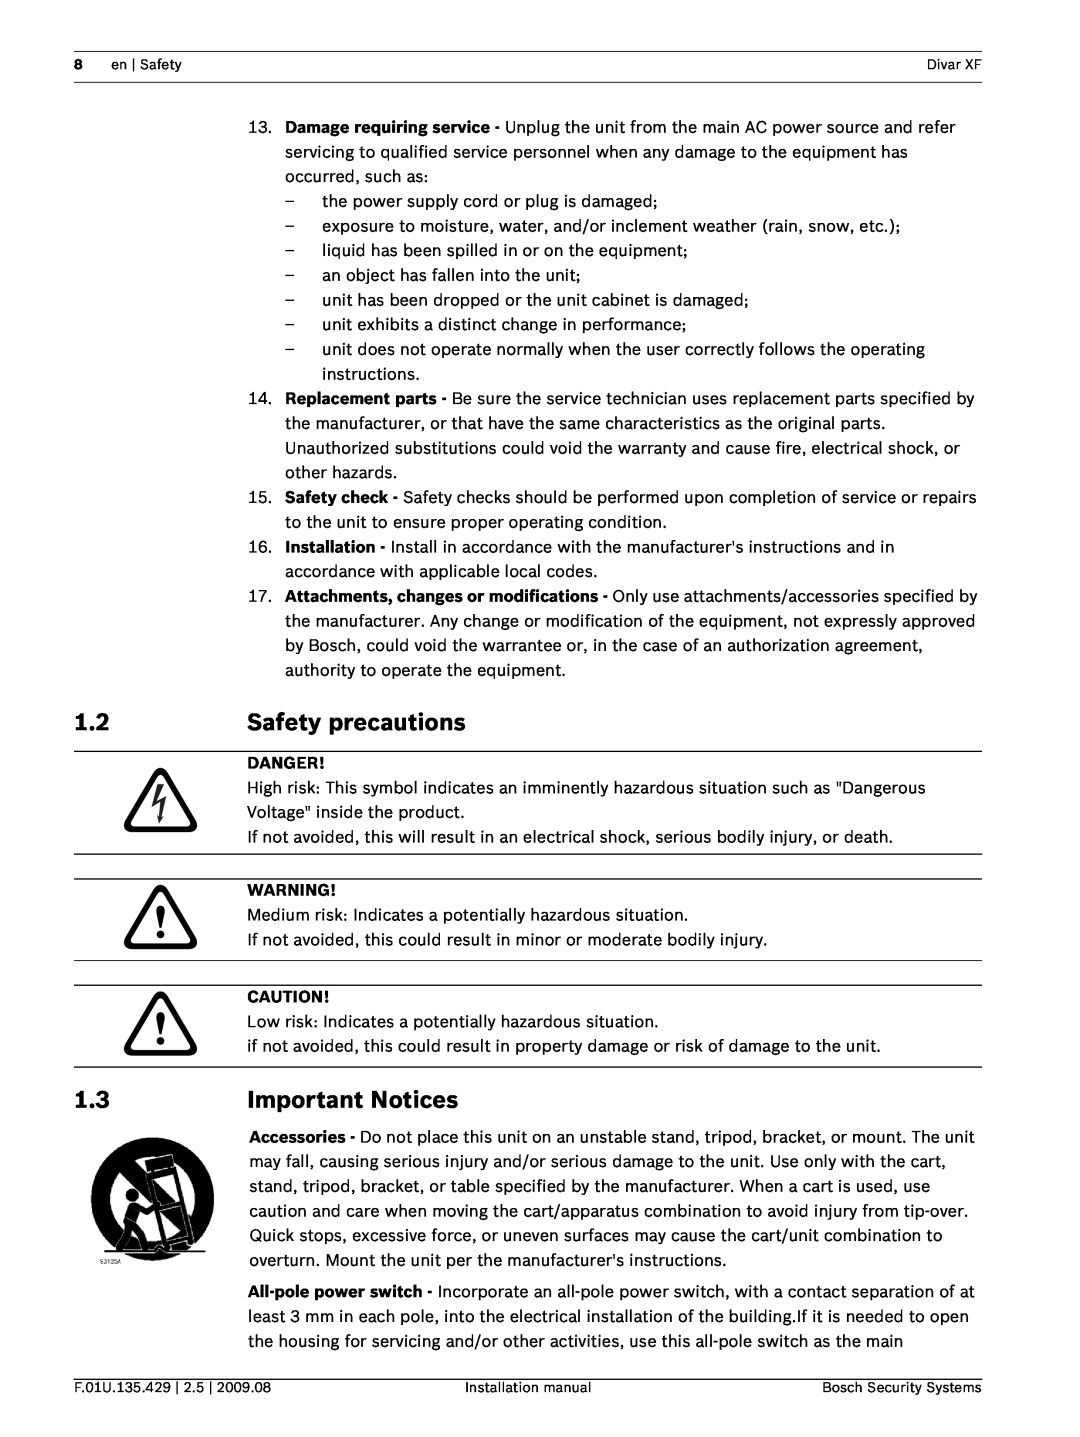 Bosch Appliances XF installation manual Safety precautions, Important Notices, Danger 